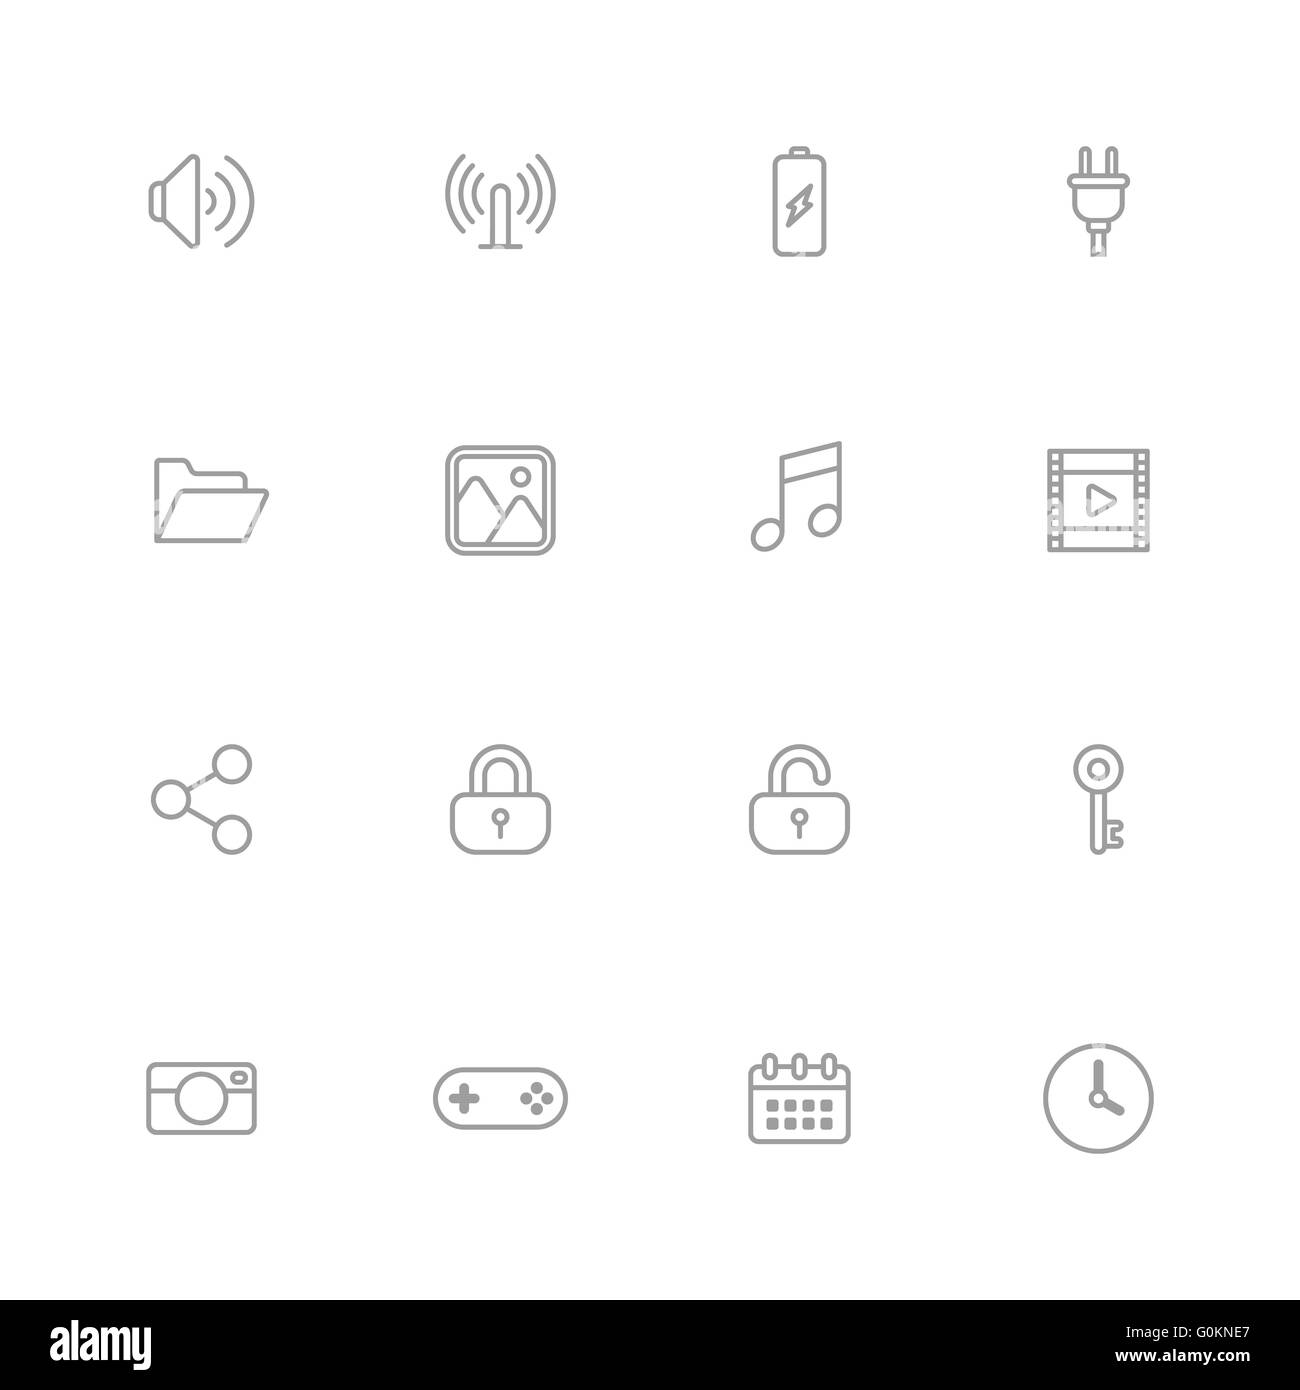 [JPEG] gray line simple web icon set for web, UI, infographic and mobile apps Stock Photo